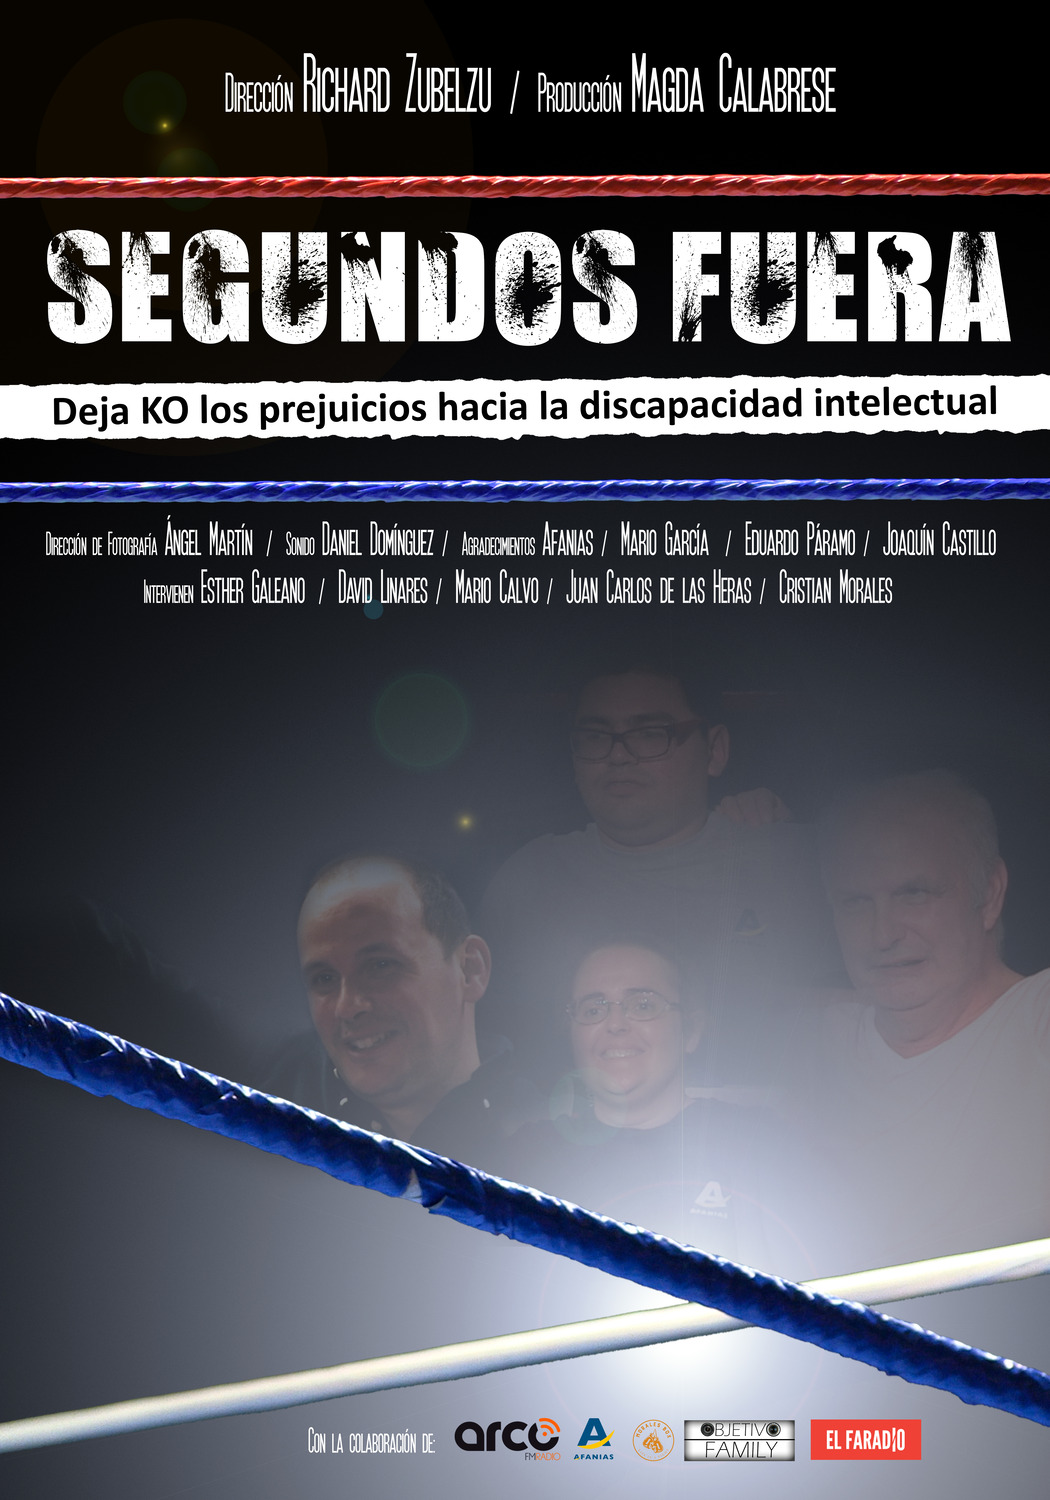 Extra Large Movie Poster Image for Segundos fuera 